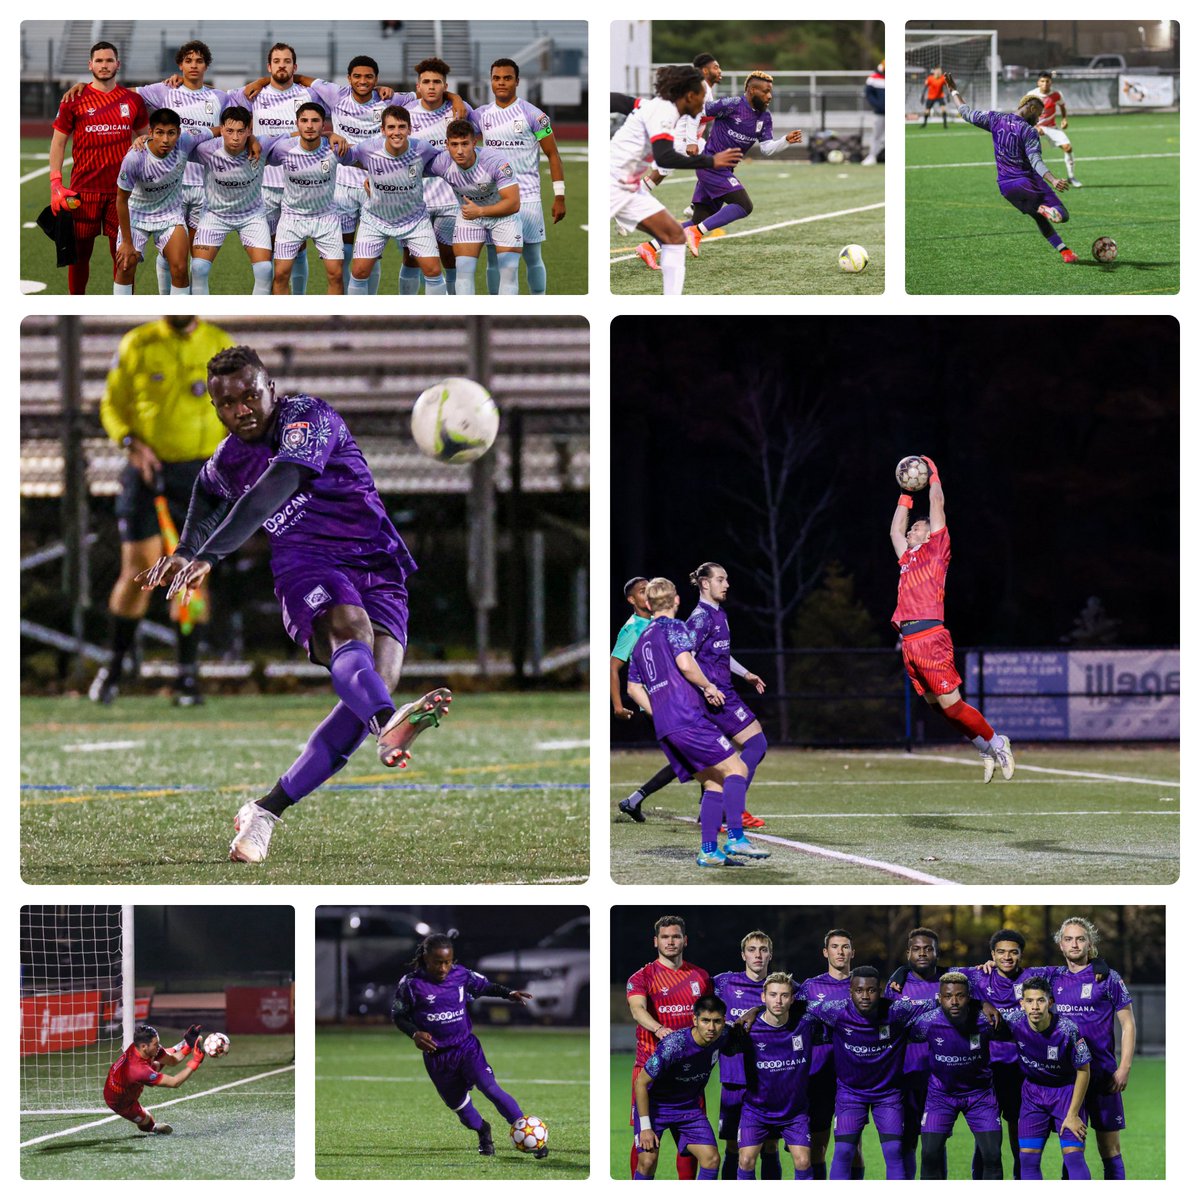 It's been a fun fall season with the @AtlanticCityFC @ACFC_ES. They were a great bunch of guys. I am wishing them all the best on their next adventure. Any team would be lucky to have them. 

I would like to also thank @TheNISANation @NISASoccer for using my work this season.